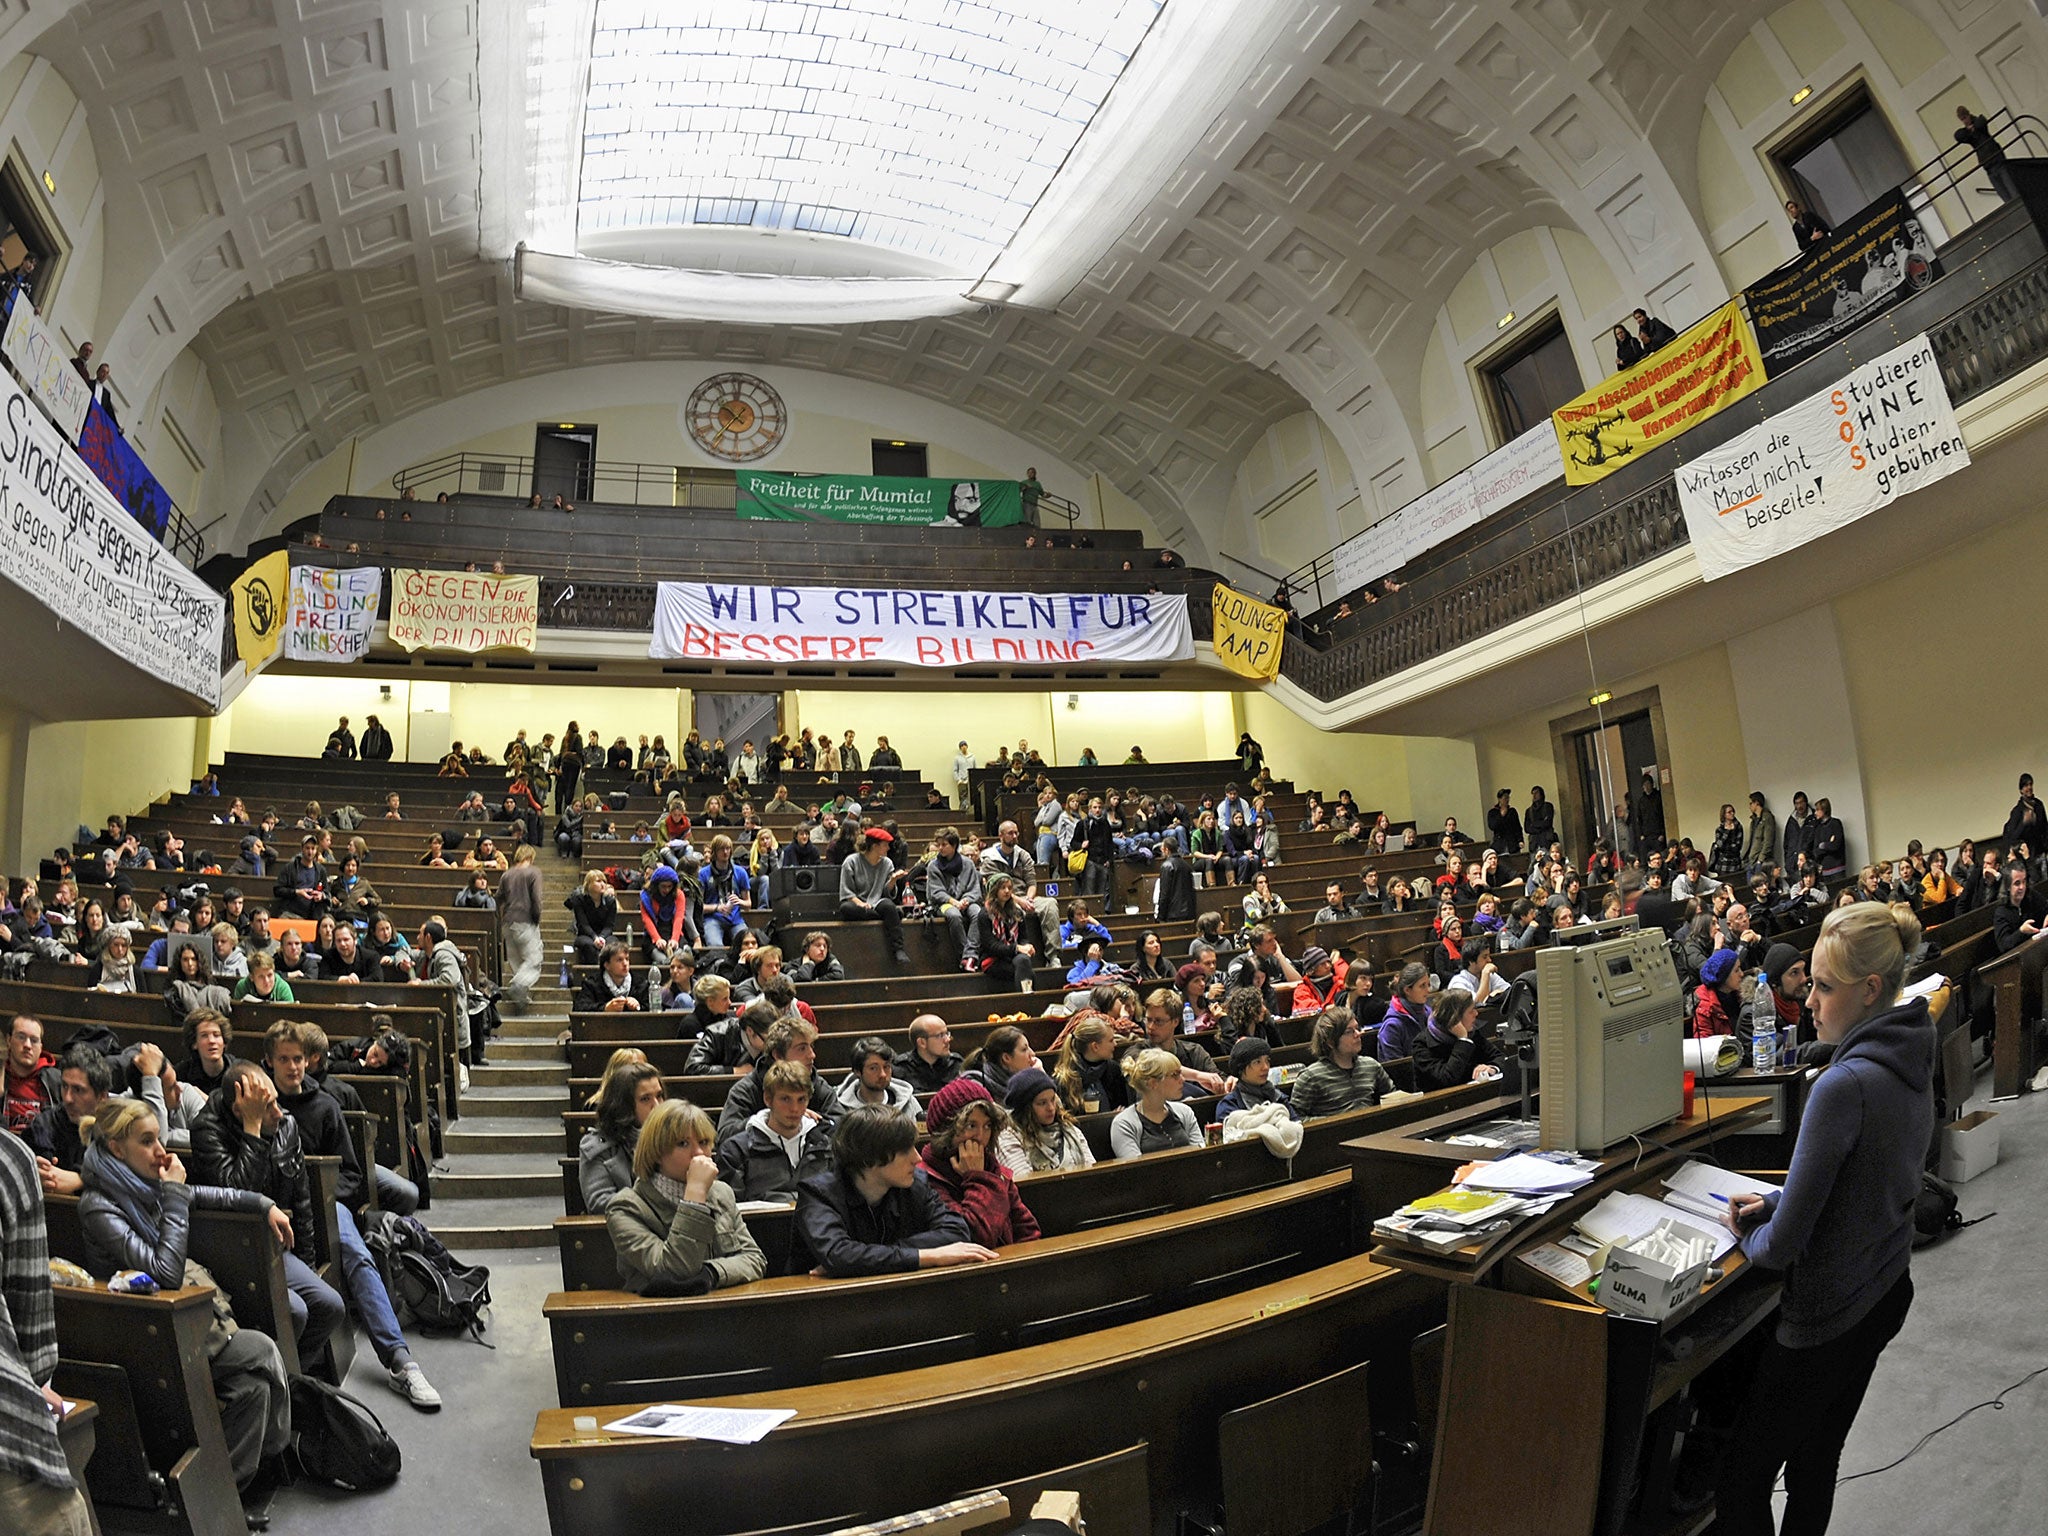 Students occupy a lecture room at the Ludwig-Maximilian University in Munich